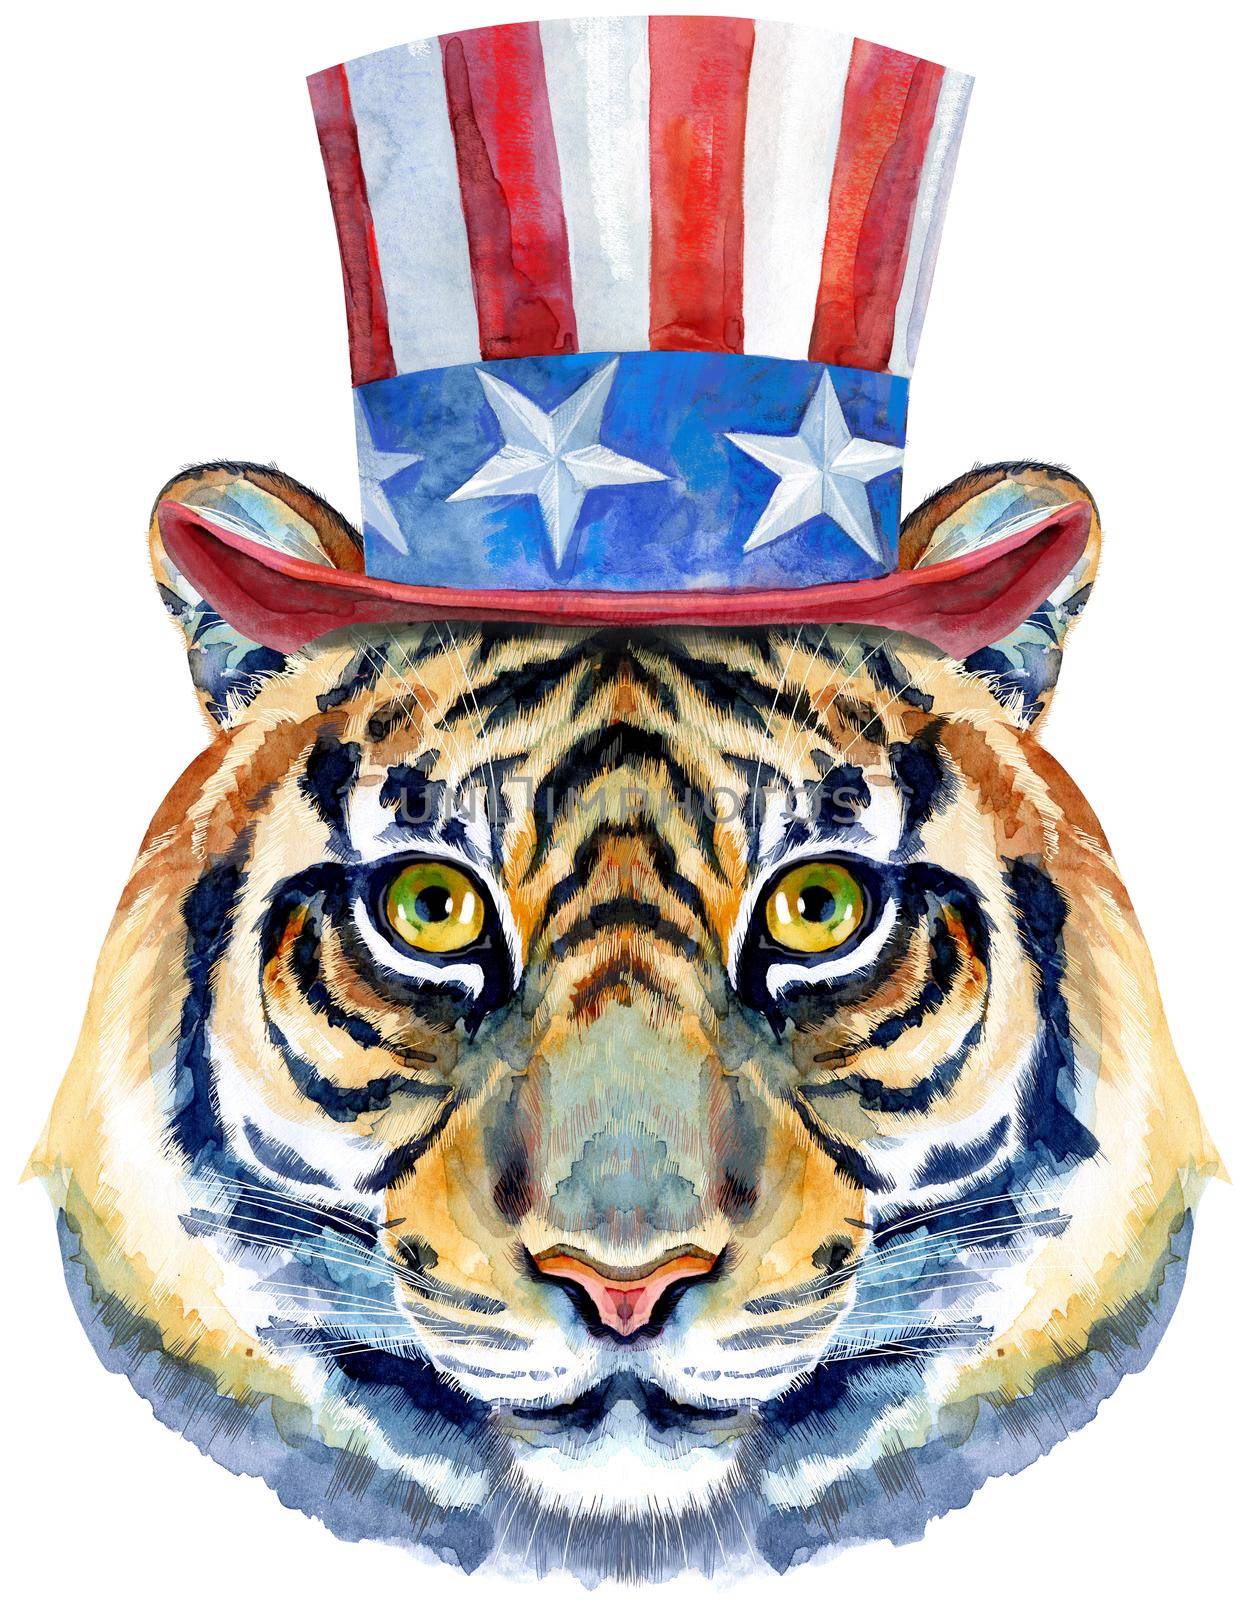 Tiger horoscope character watercolor illustration with Uncle Sam hat isolated on white background. by NataOmsk